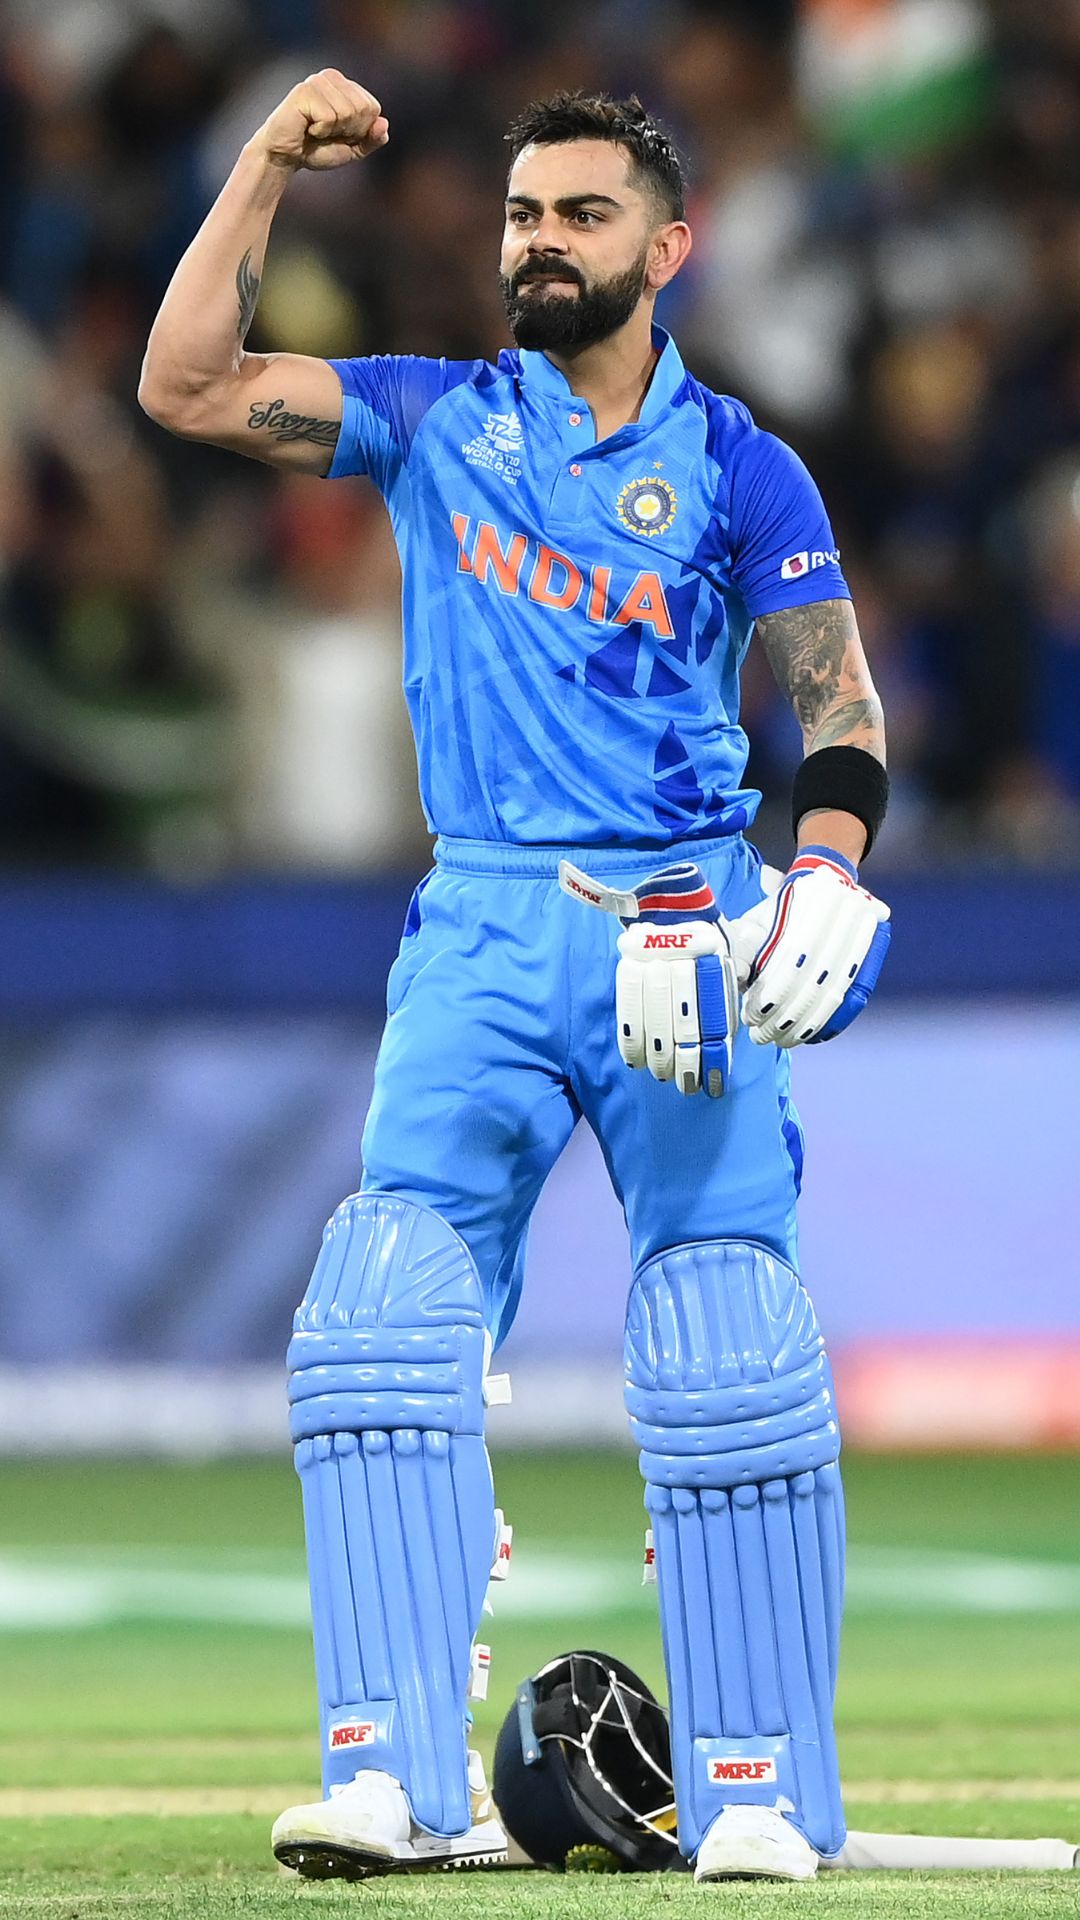 Top 10 highest scores by Indians in T20 World Cup history; Kohli features 6 times